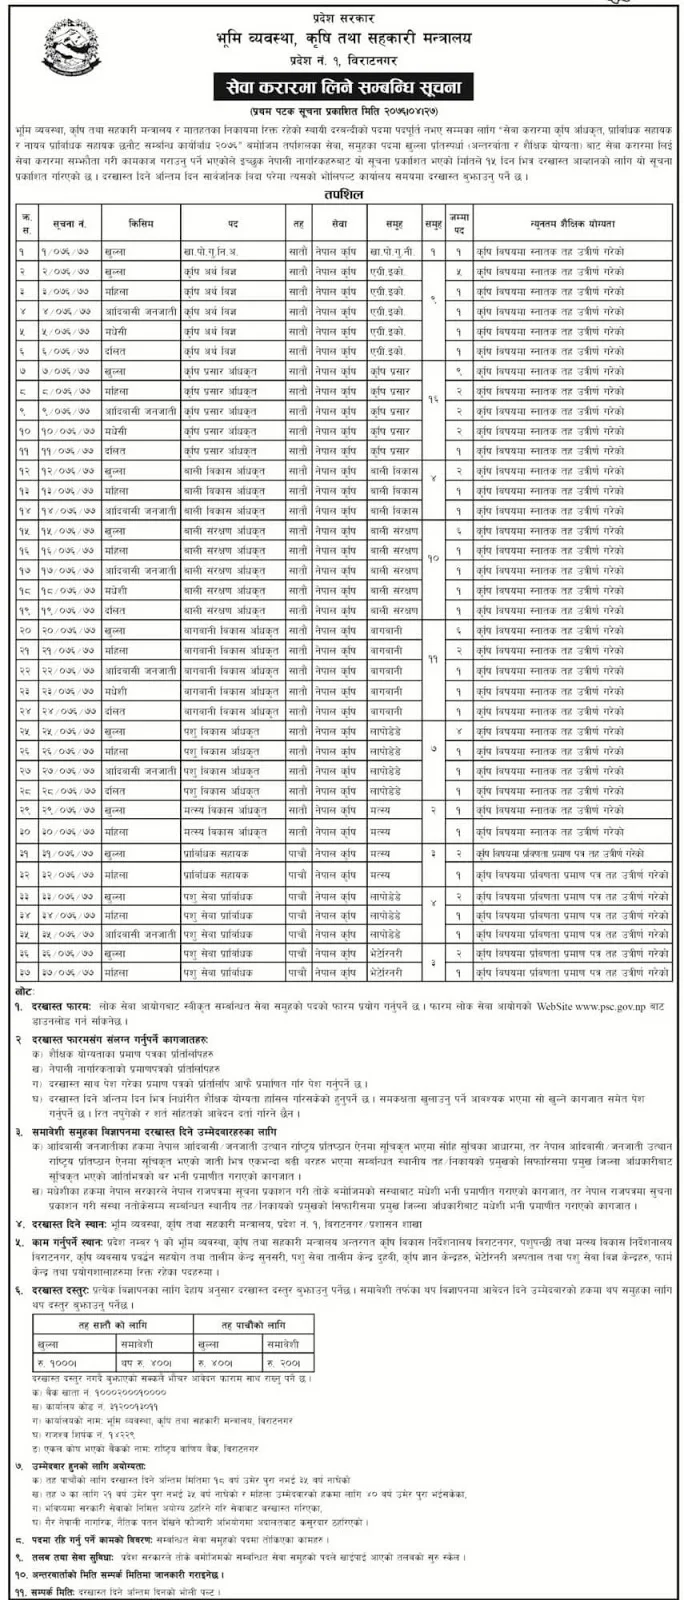 Government Jobs for Various Positions